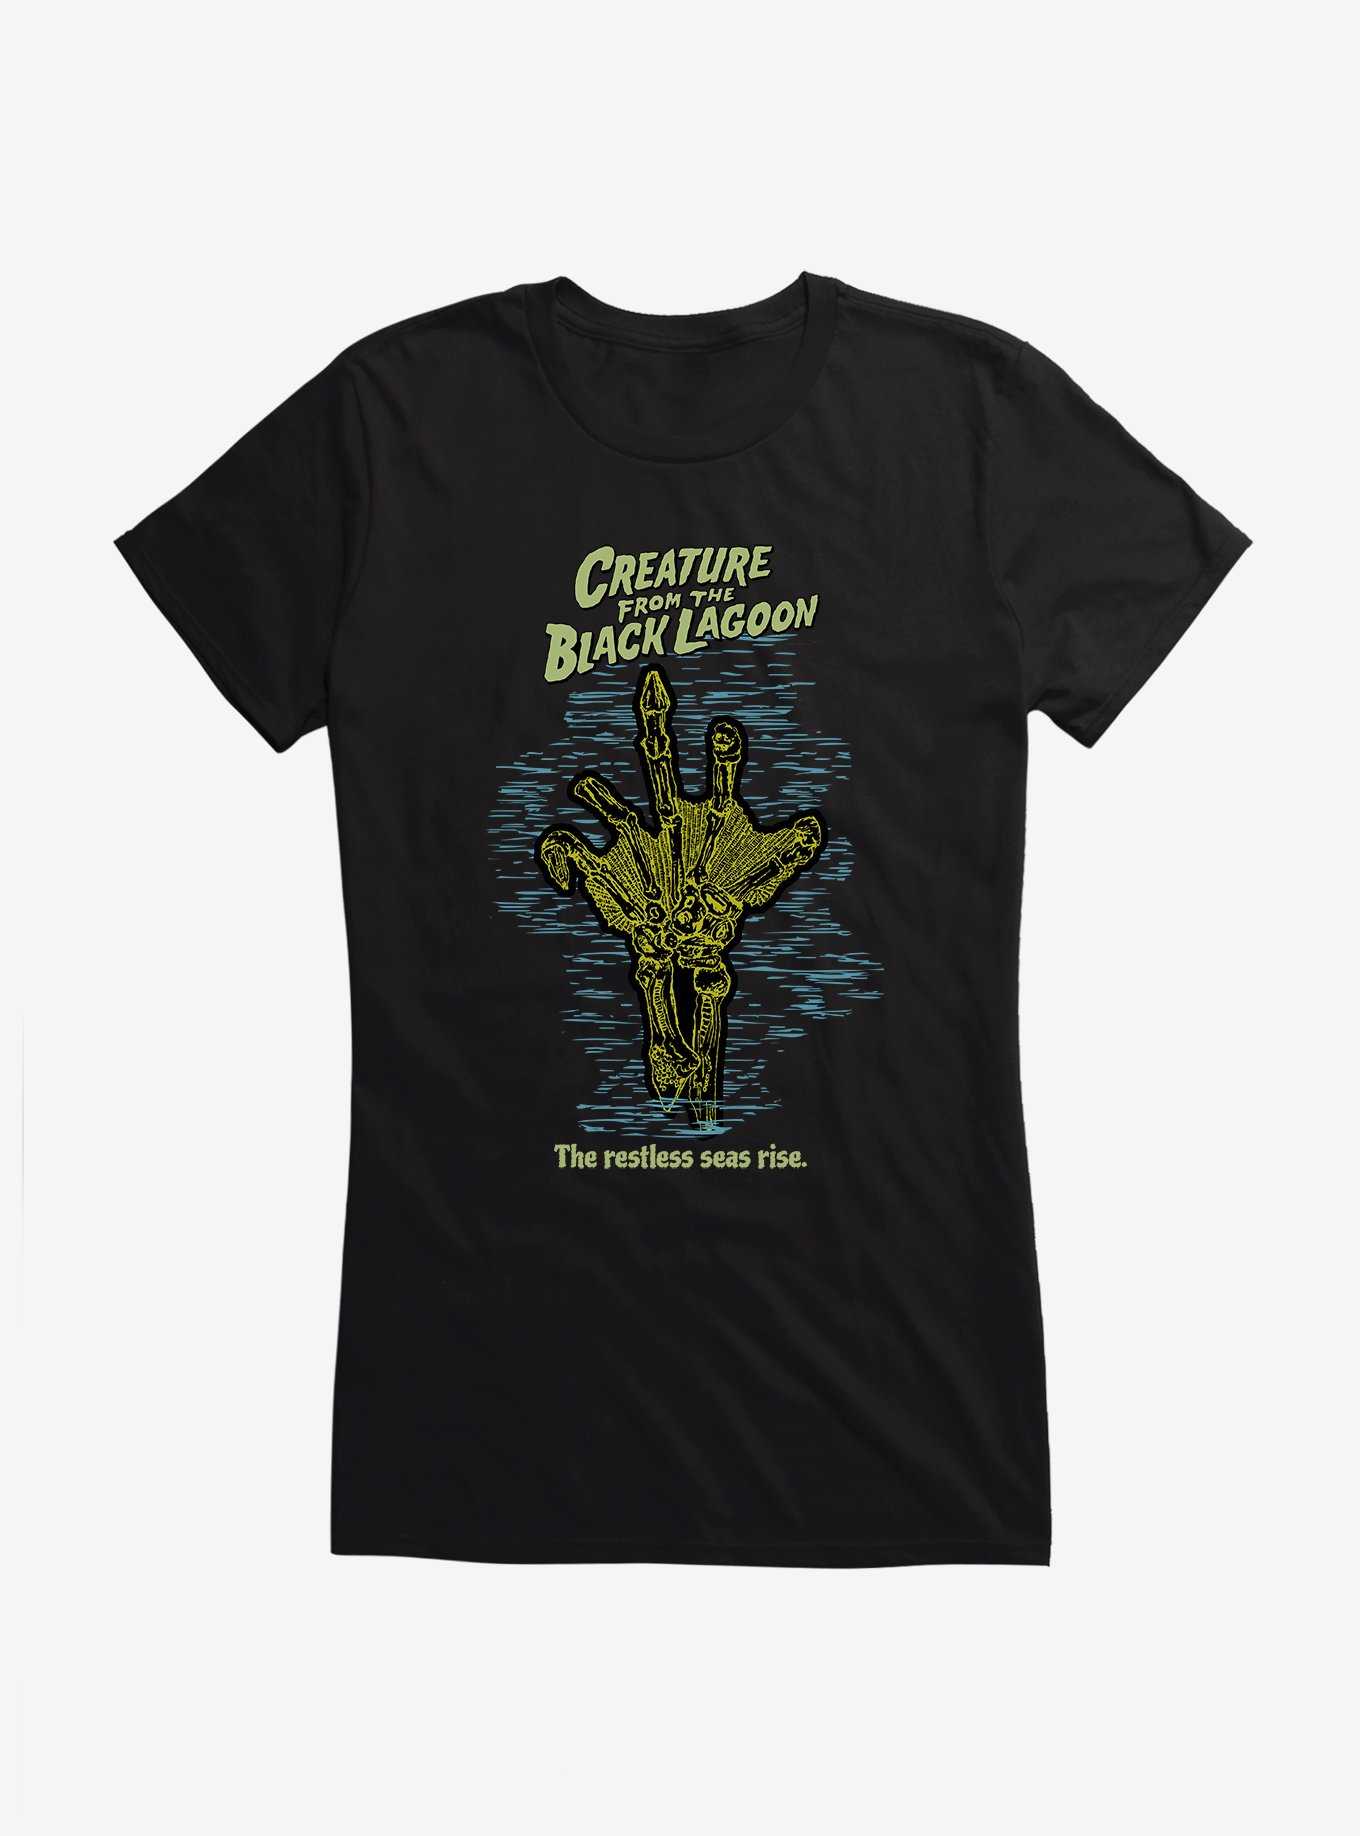 Creature From The Black Lagoon Restless Seas Rise Girls T-Shirt, , hi-res